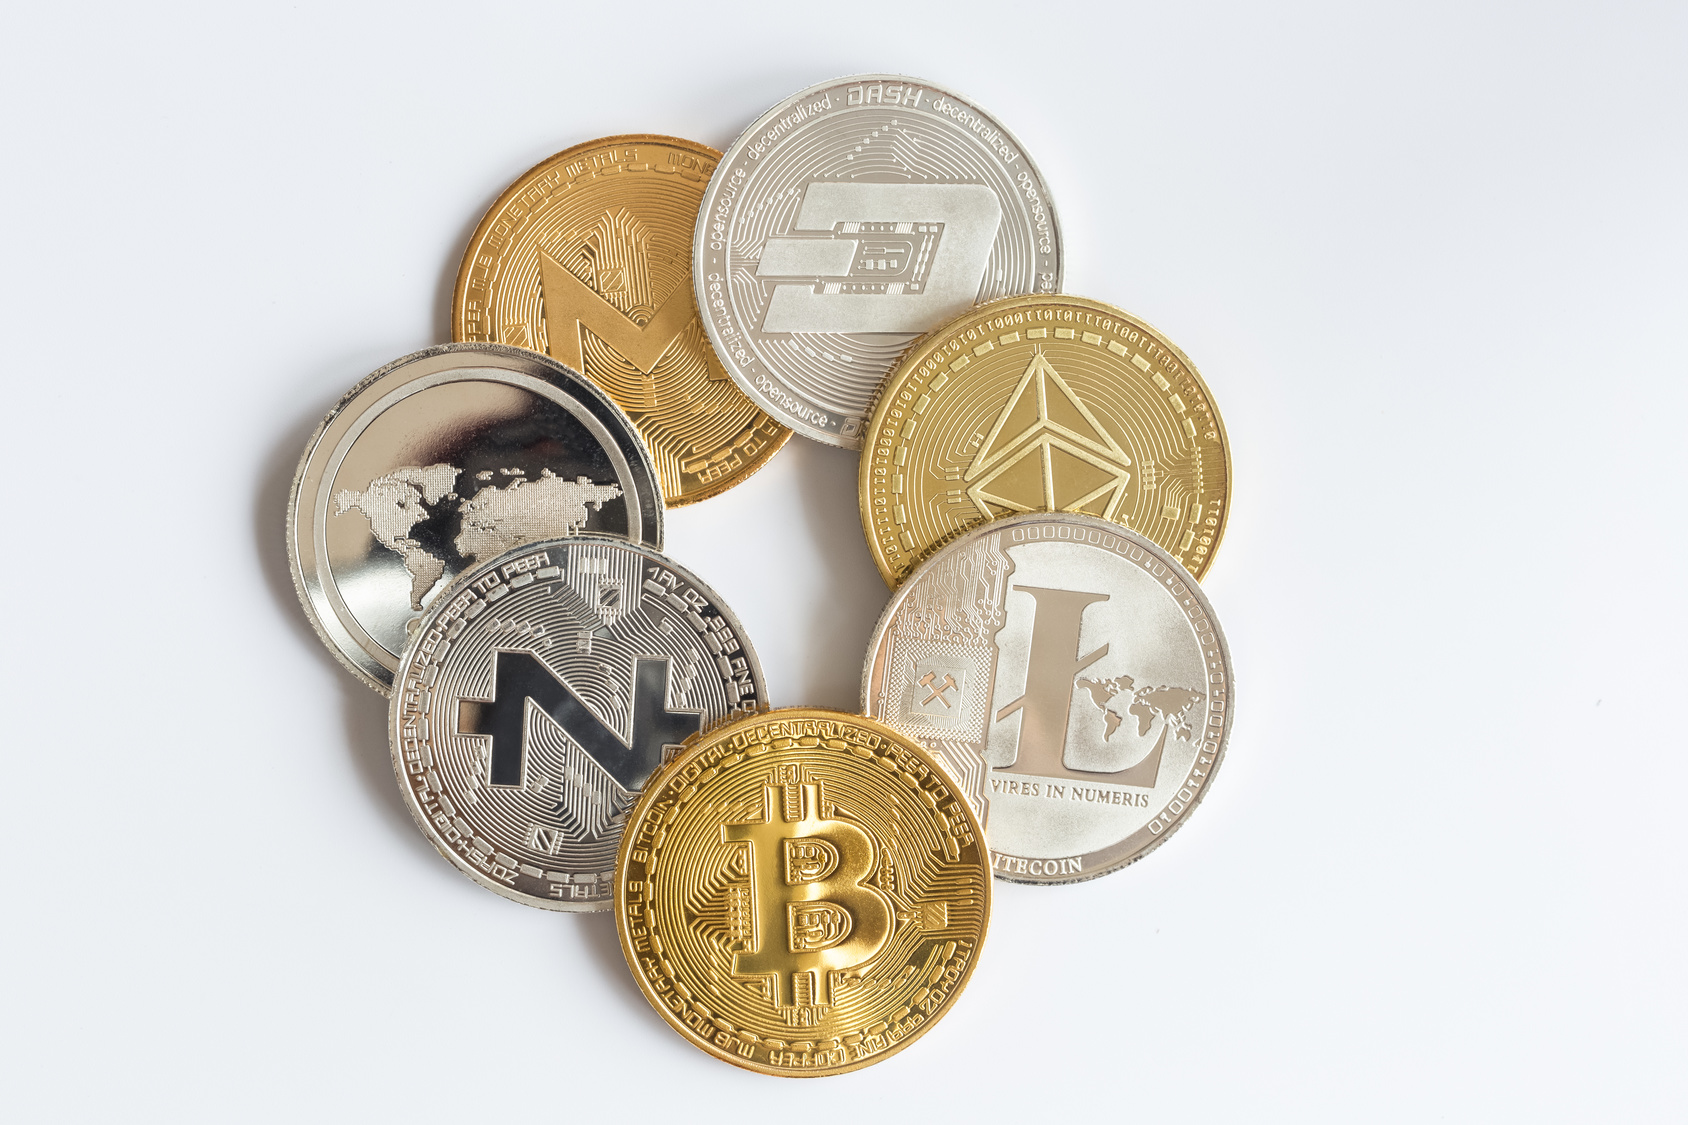 The Top 10 Altcoins You Need to Watch in 2019 and Beyond